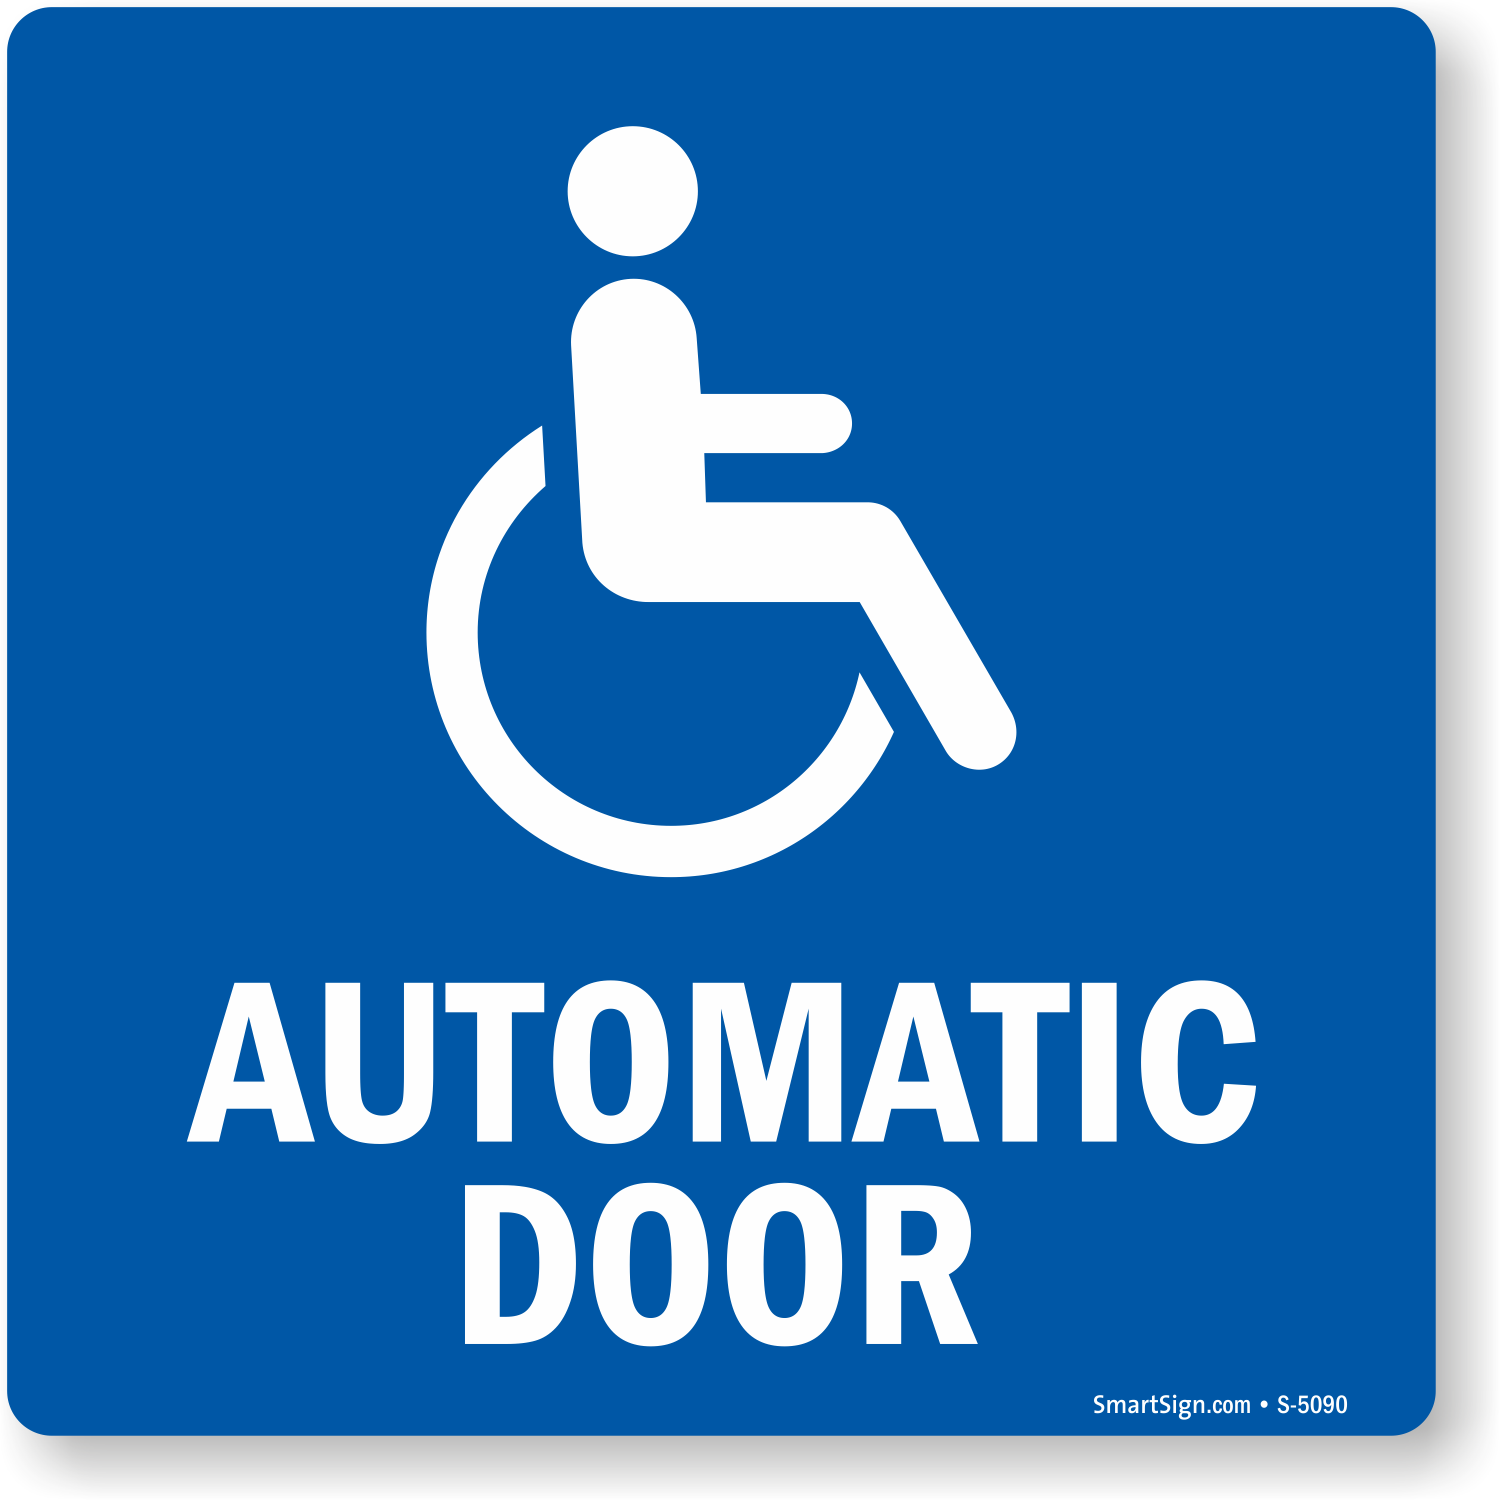 Automatic Door Label with Accessible Symbol, SKU: S-5090